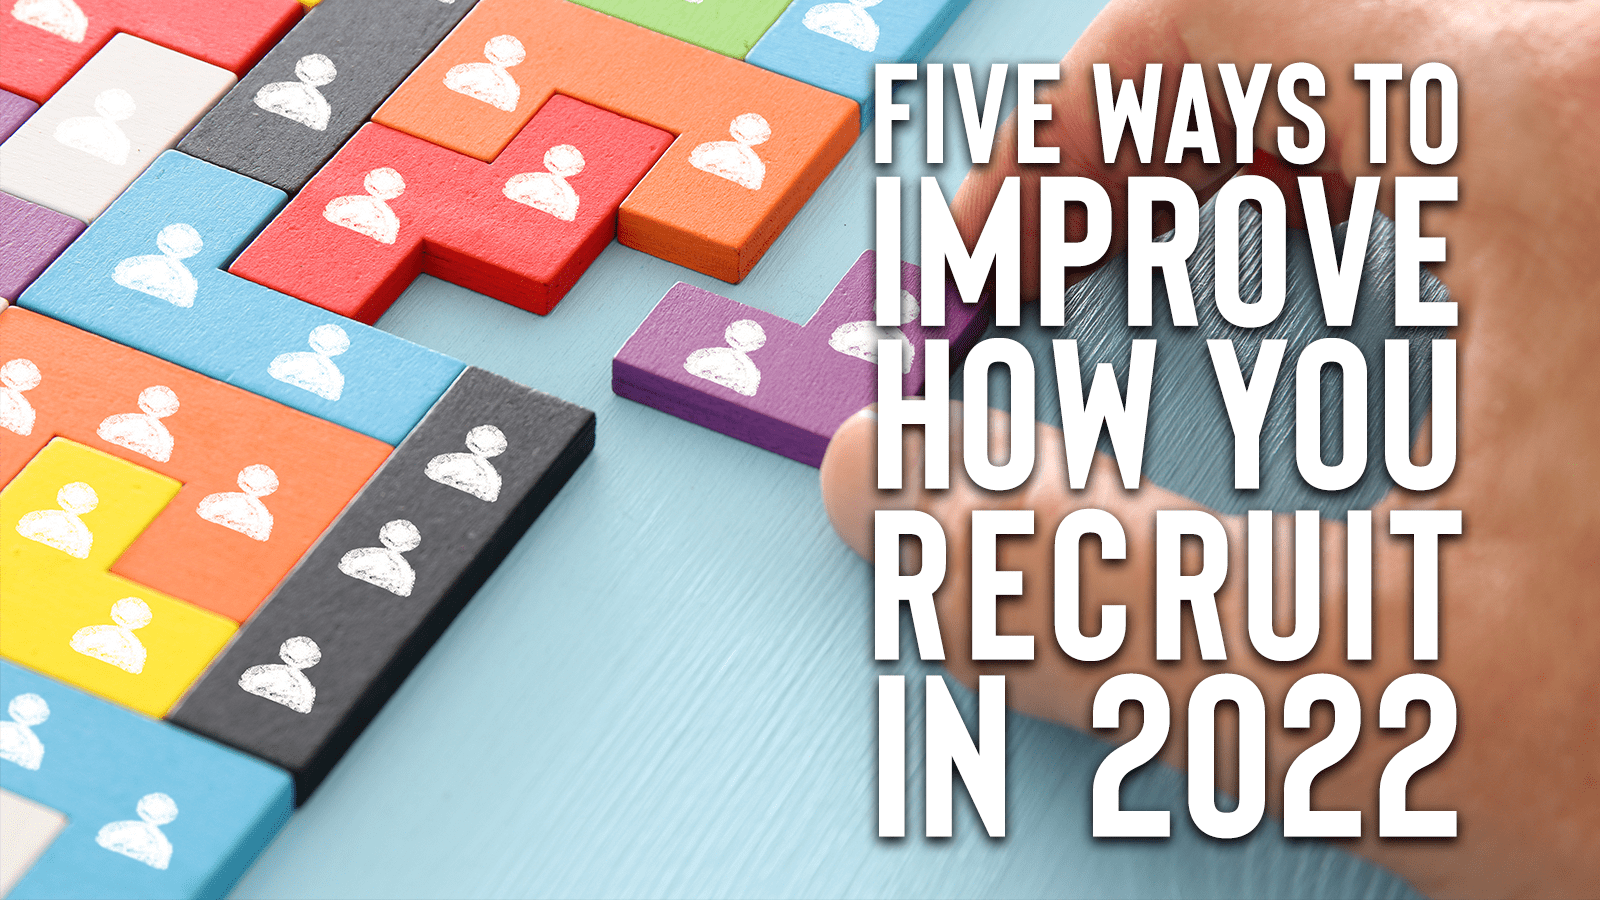 Five Ways To Improve how your recruit in 2022